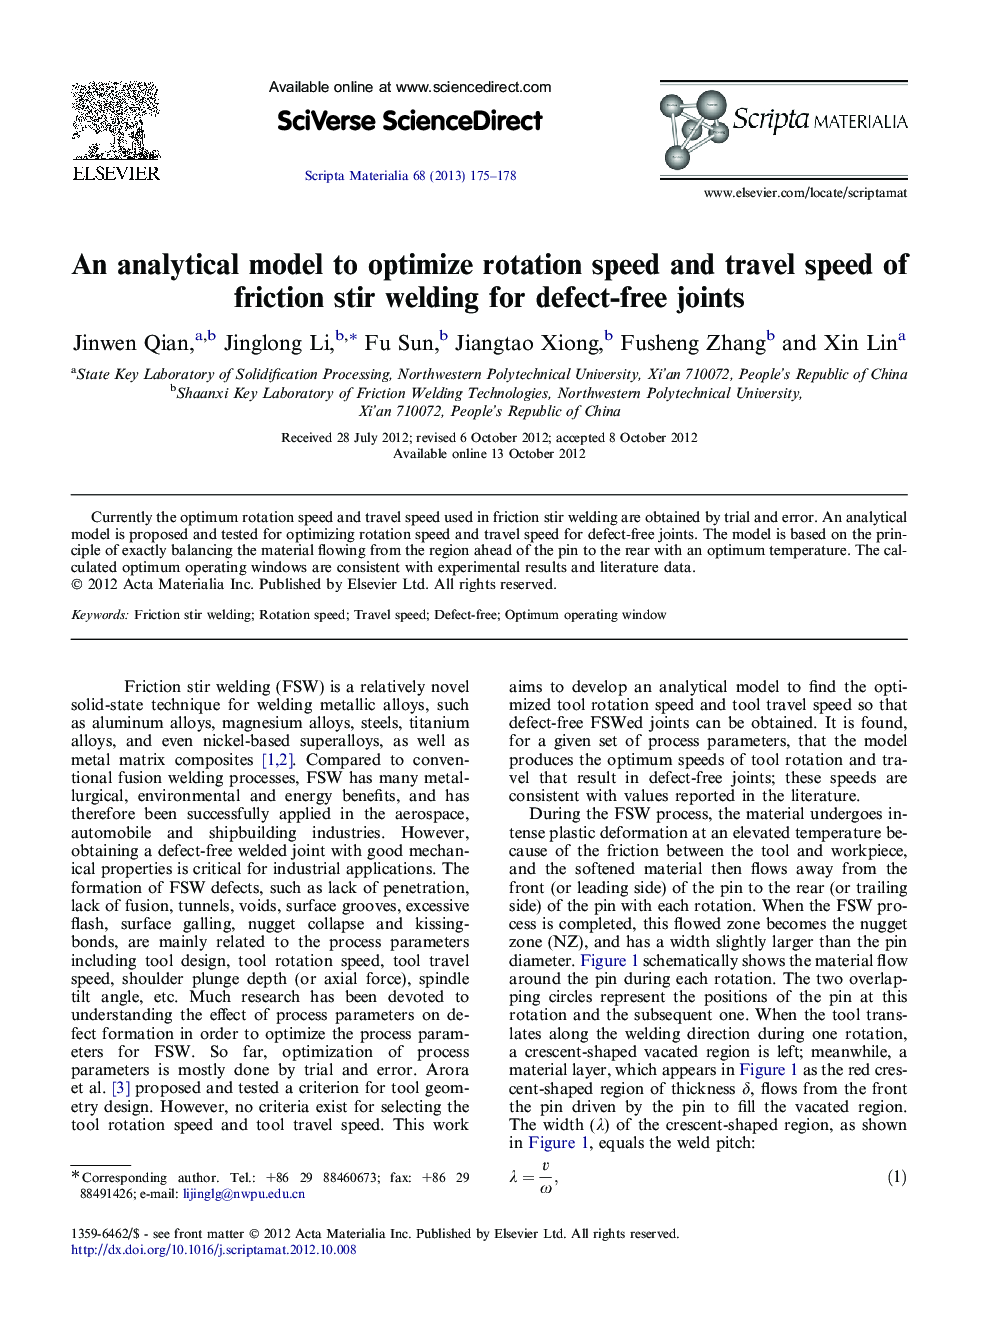 An analytical model to optimize rotation speed and travel speed of friction stir welding for defect-free joints